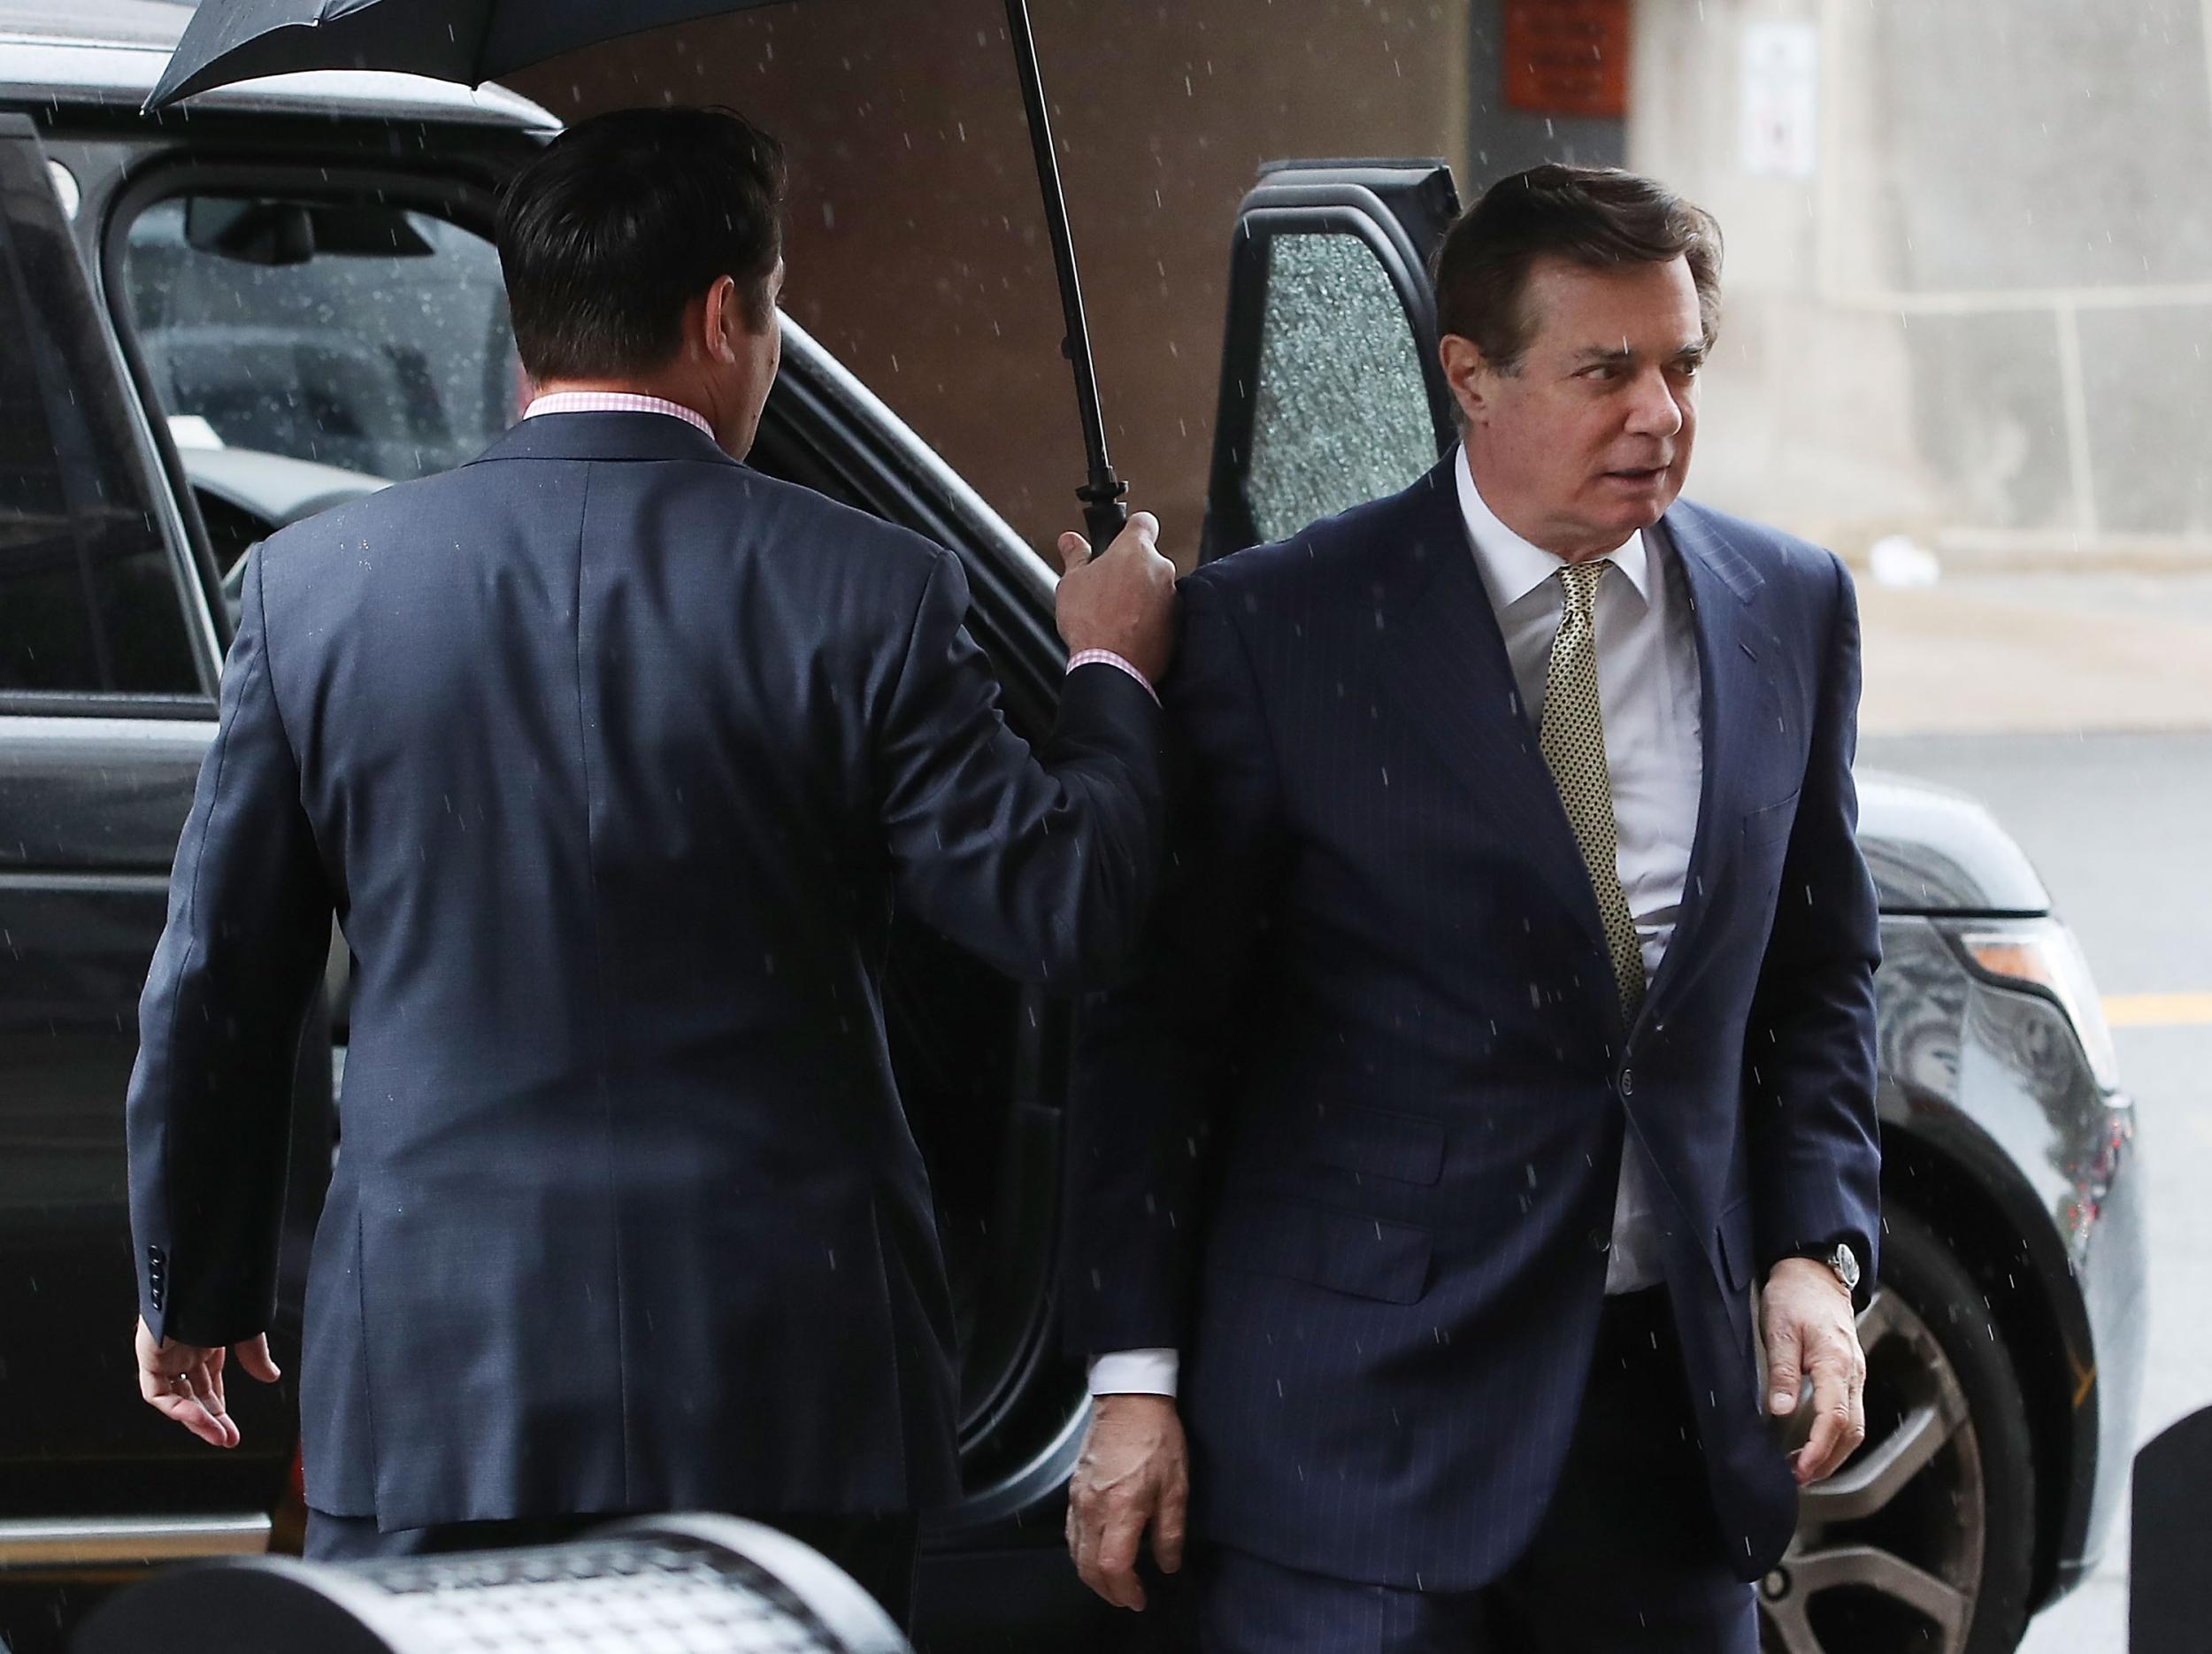 Mr Manafort's lawyers have argued that the case should be thrown out